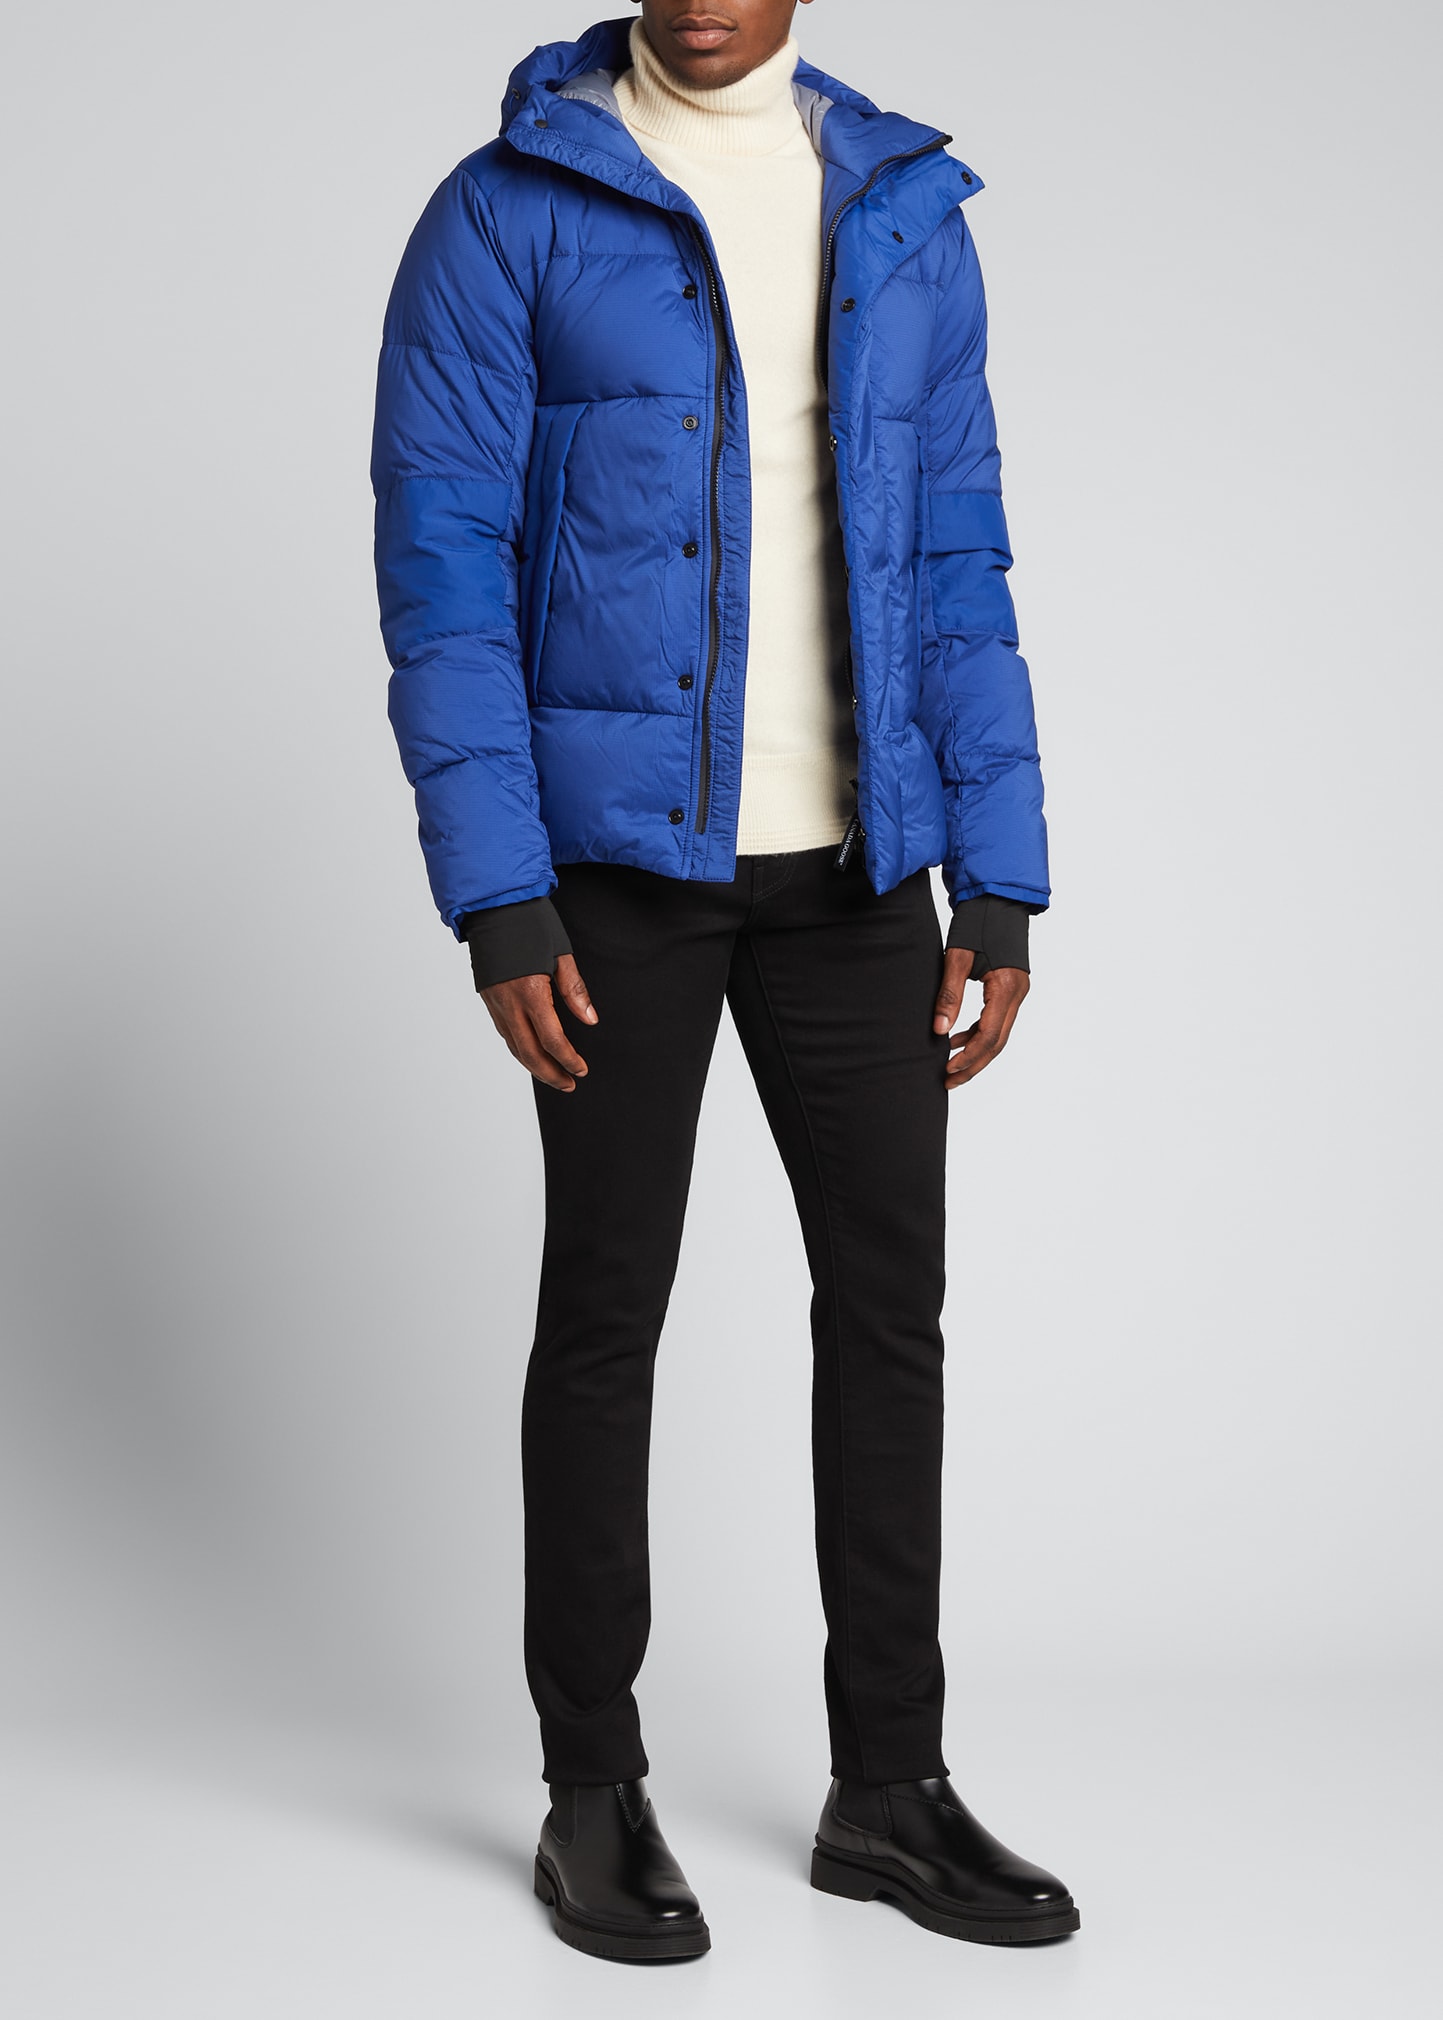 Canada Goose Men's Armstrong Hooded Puffer Jacket